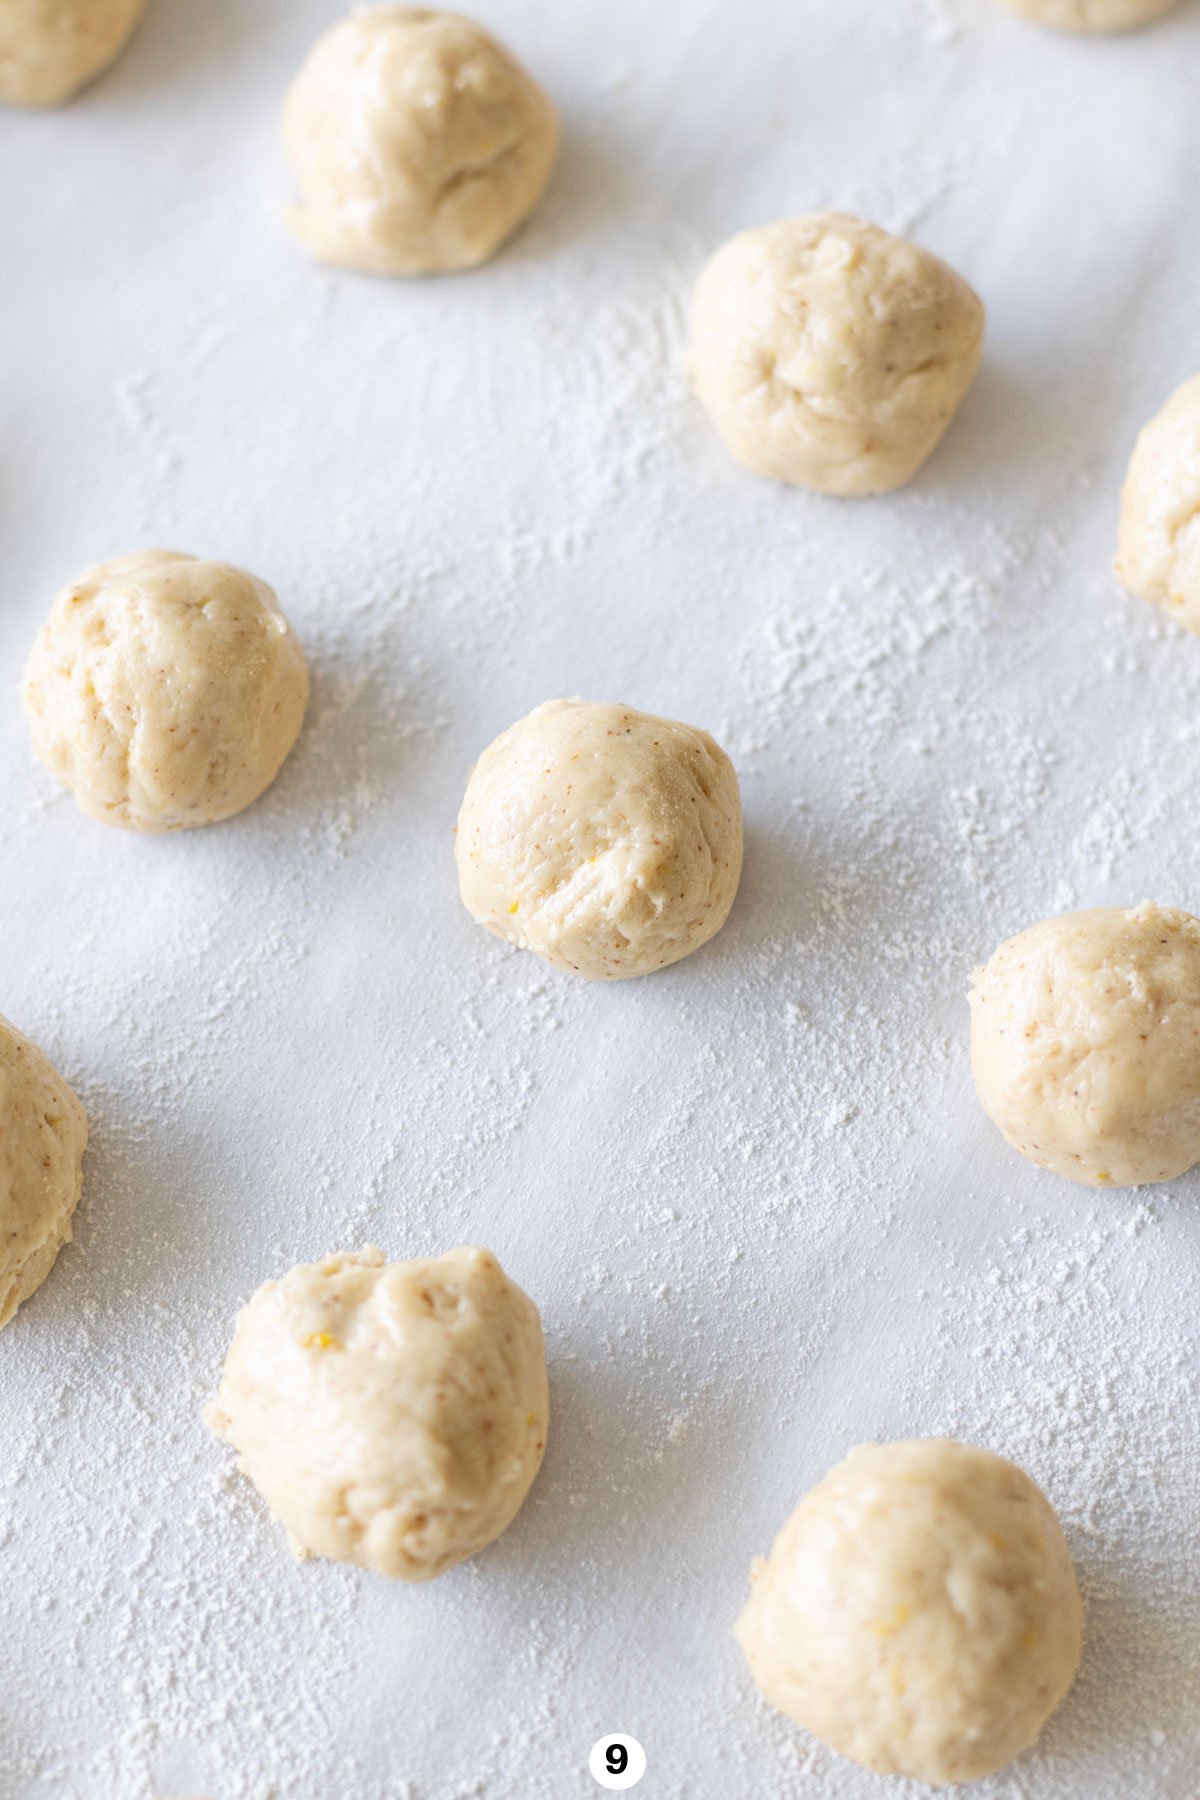 Rolling the anise cookie dough into small balls and lining them up on the pan. 